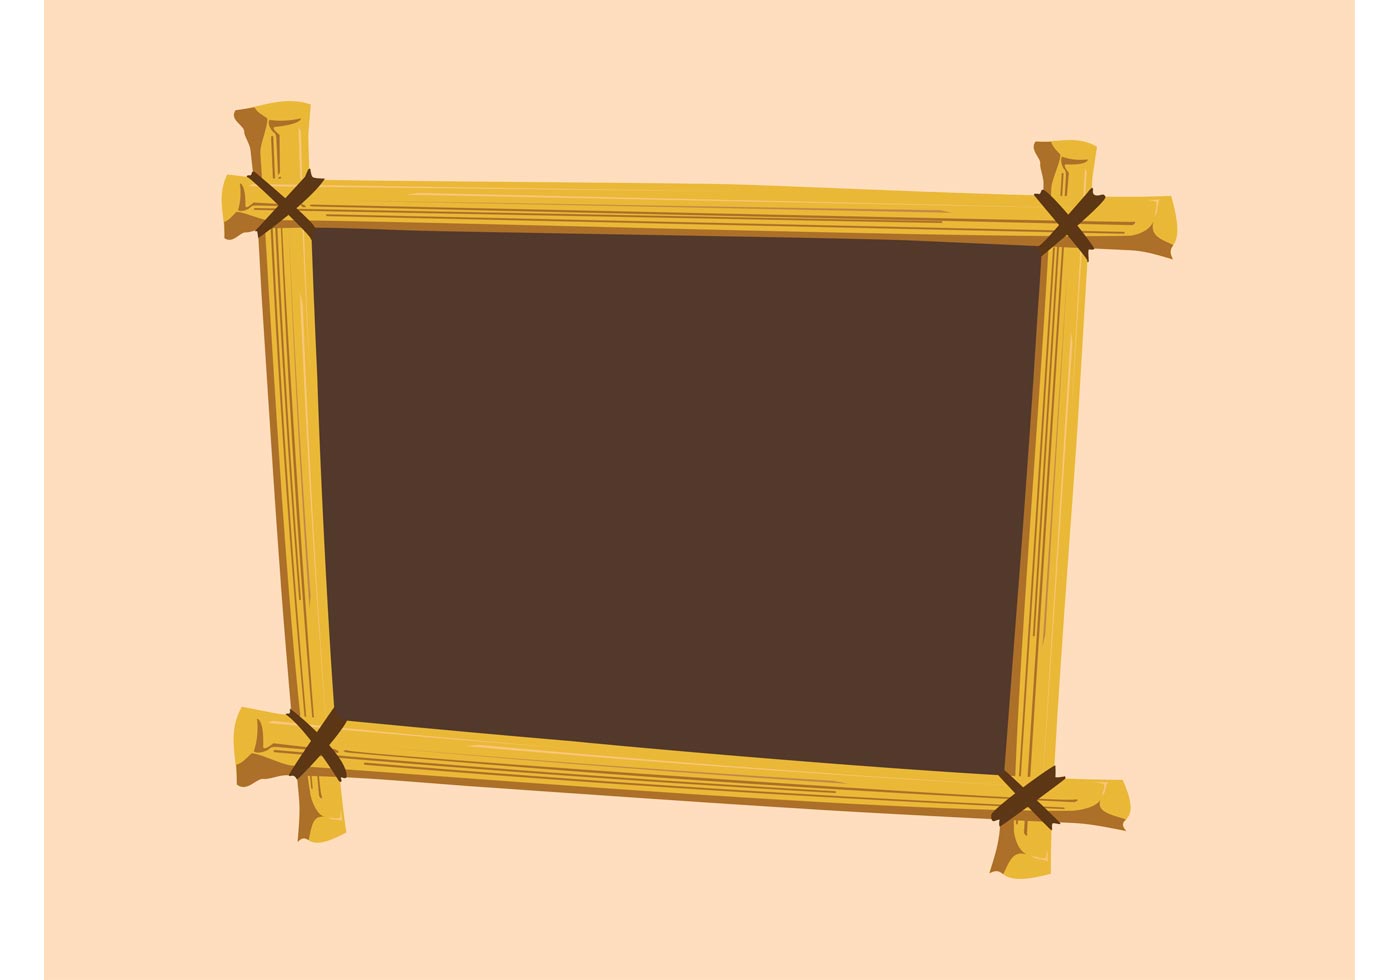 Wooden Frame - Download Free Vector Art, Stock Graphics & Images